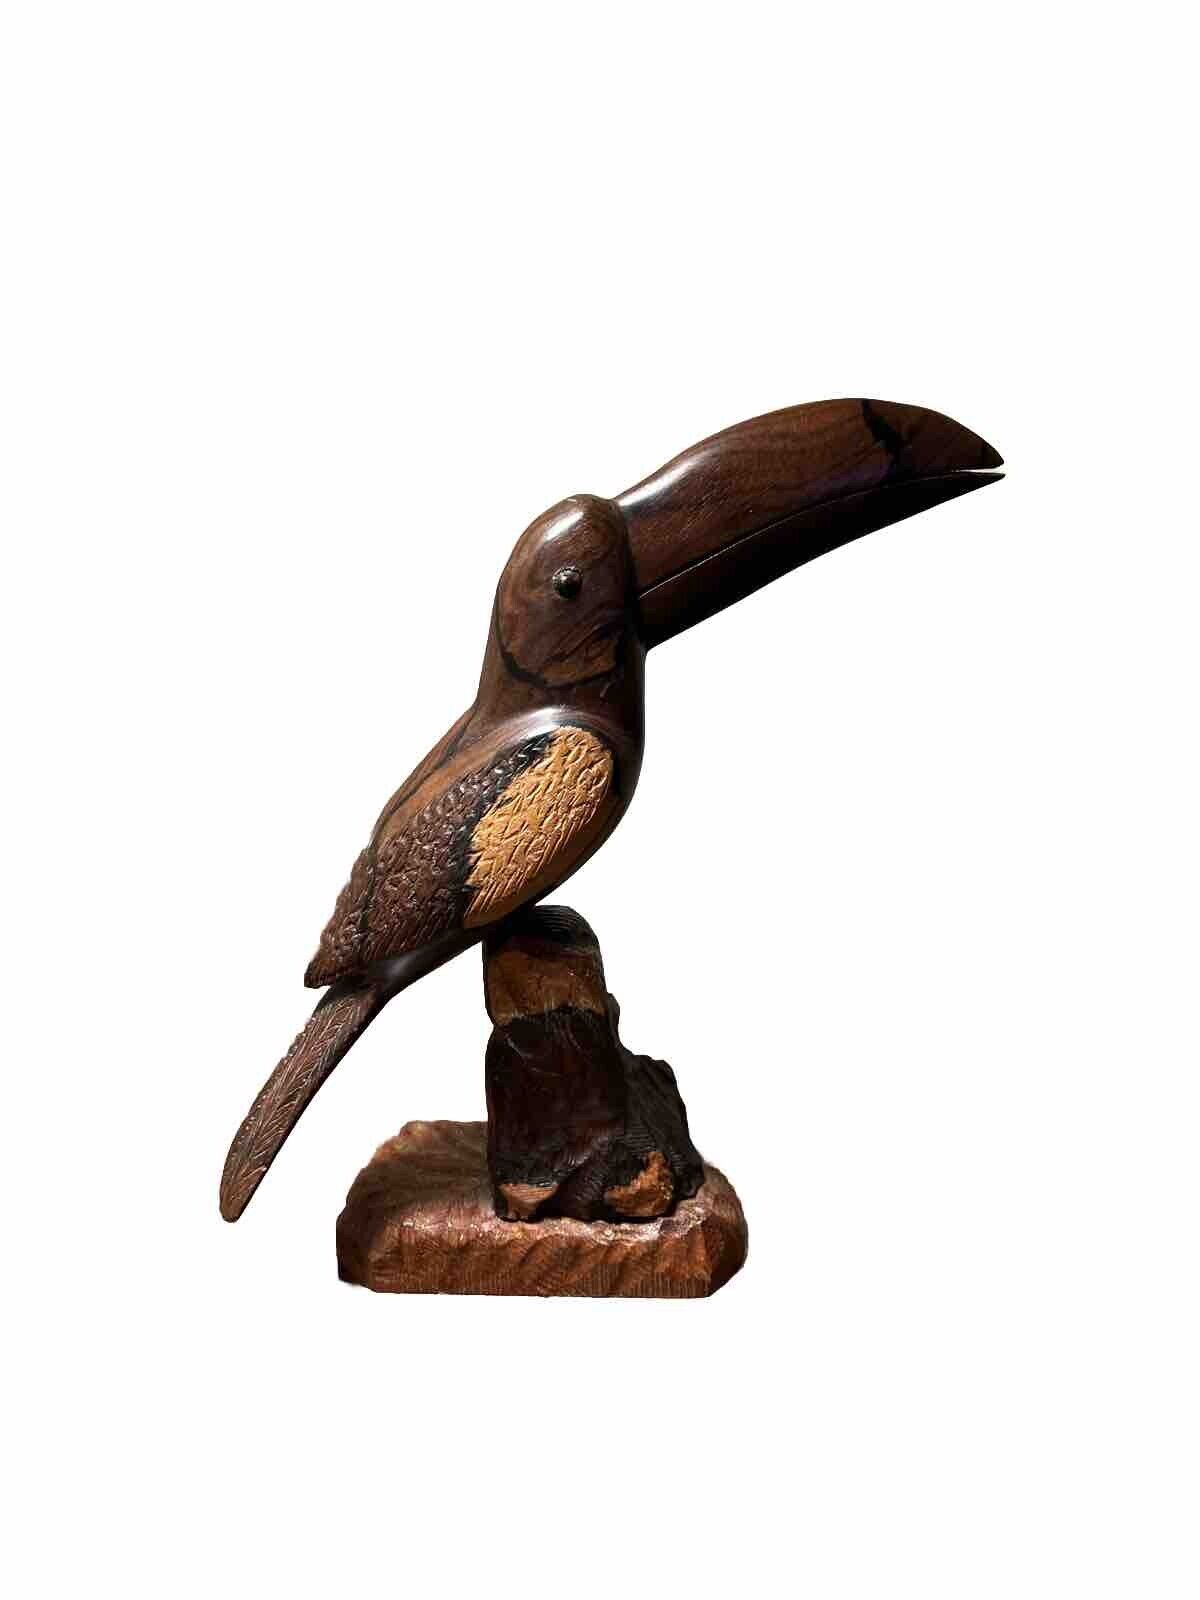 Vintage Wooden Toucan with Intricately Carved Tail Feathers Very Detailed Pivots